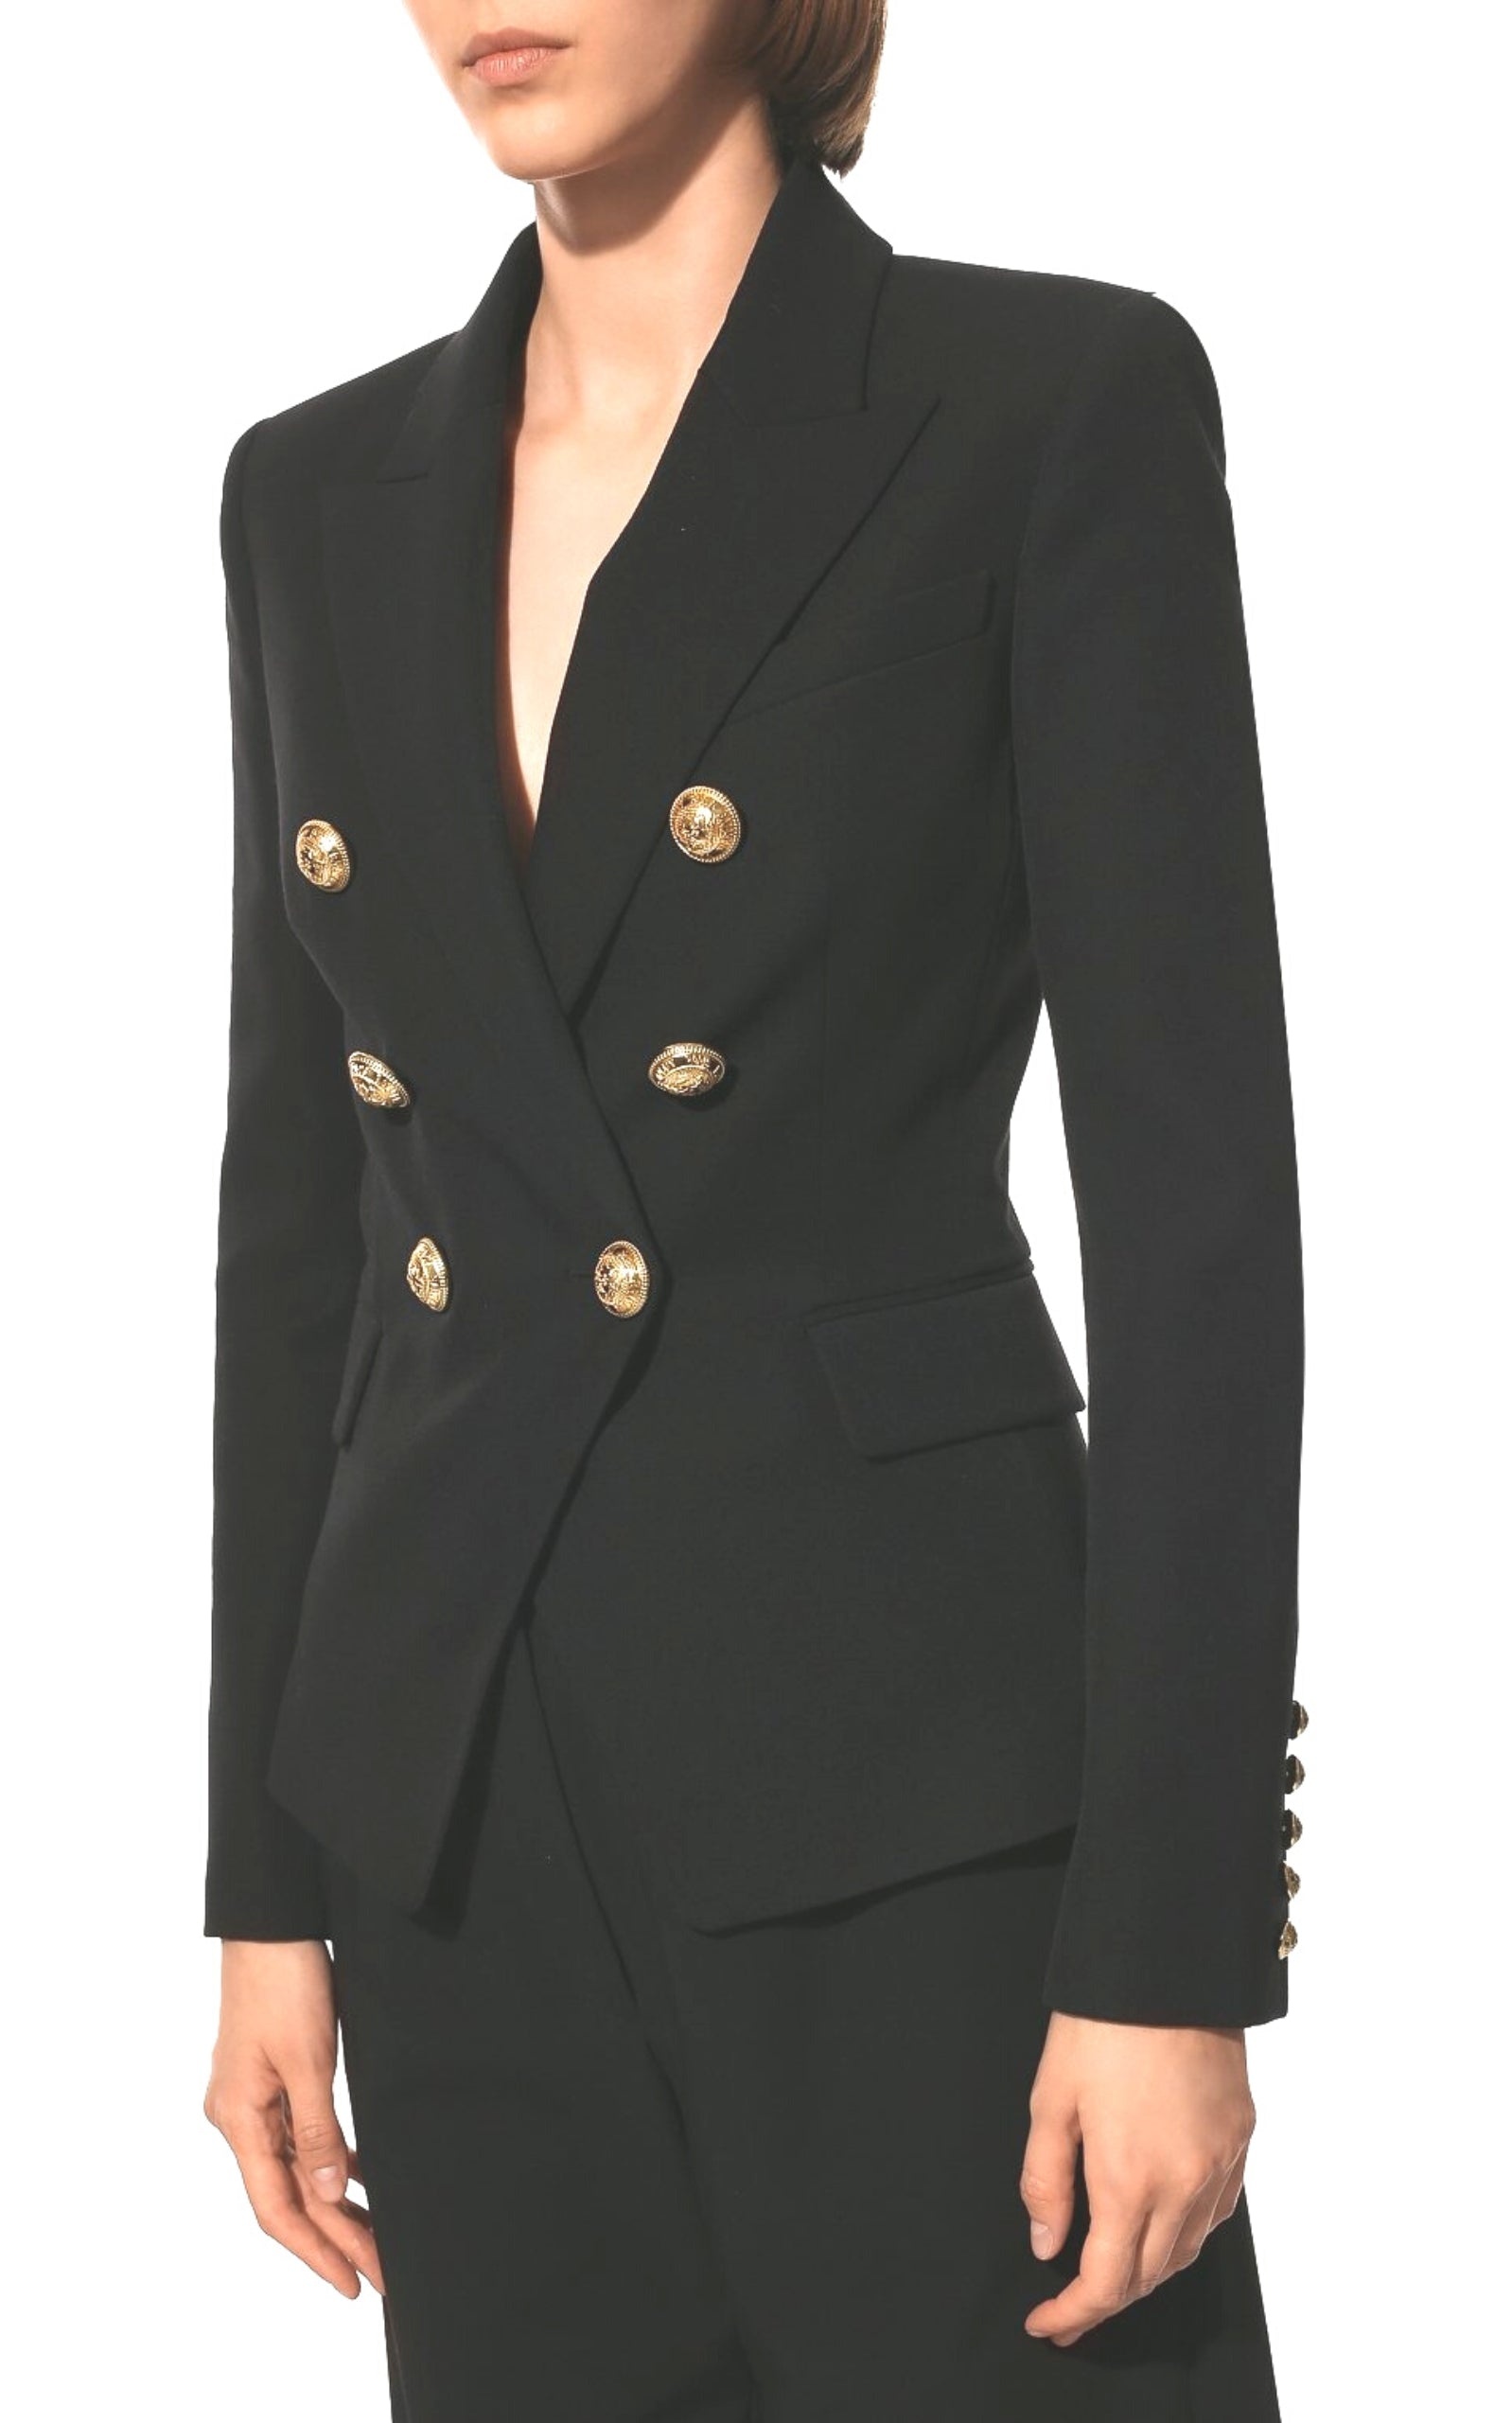 Black Wool Classic Double-Breasted Blazer Jacket - 3